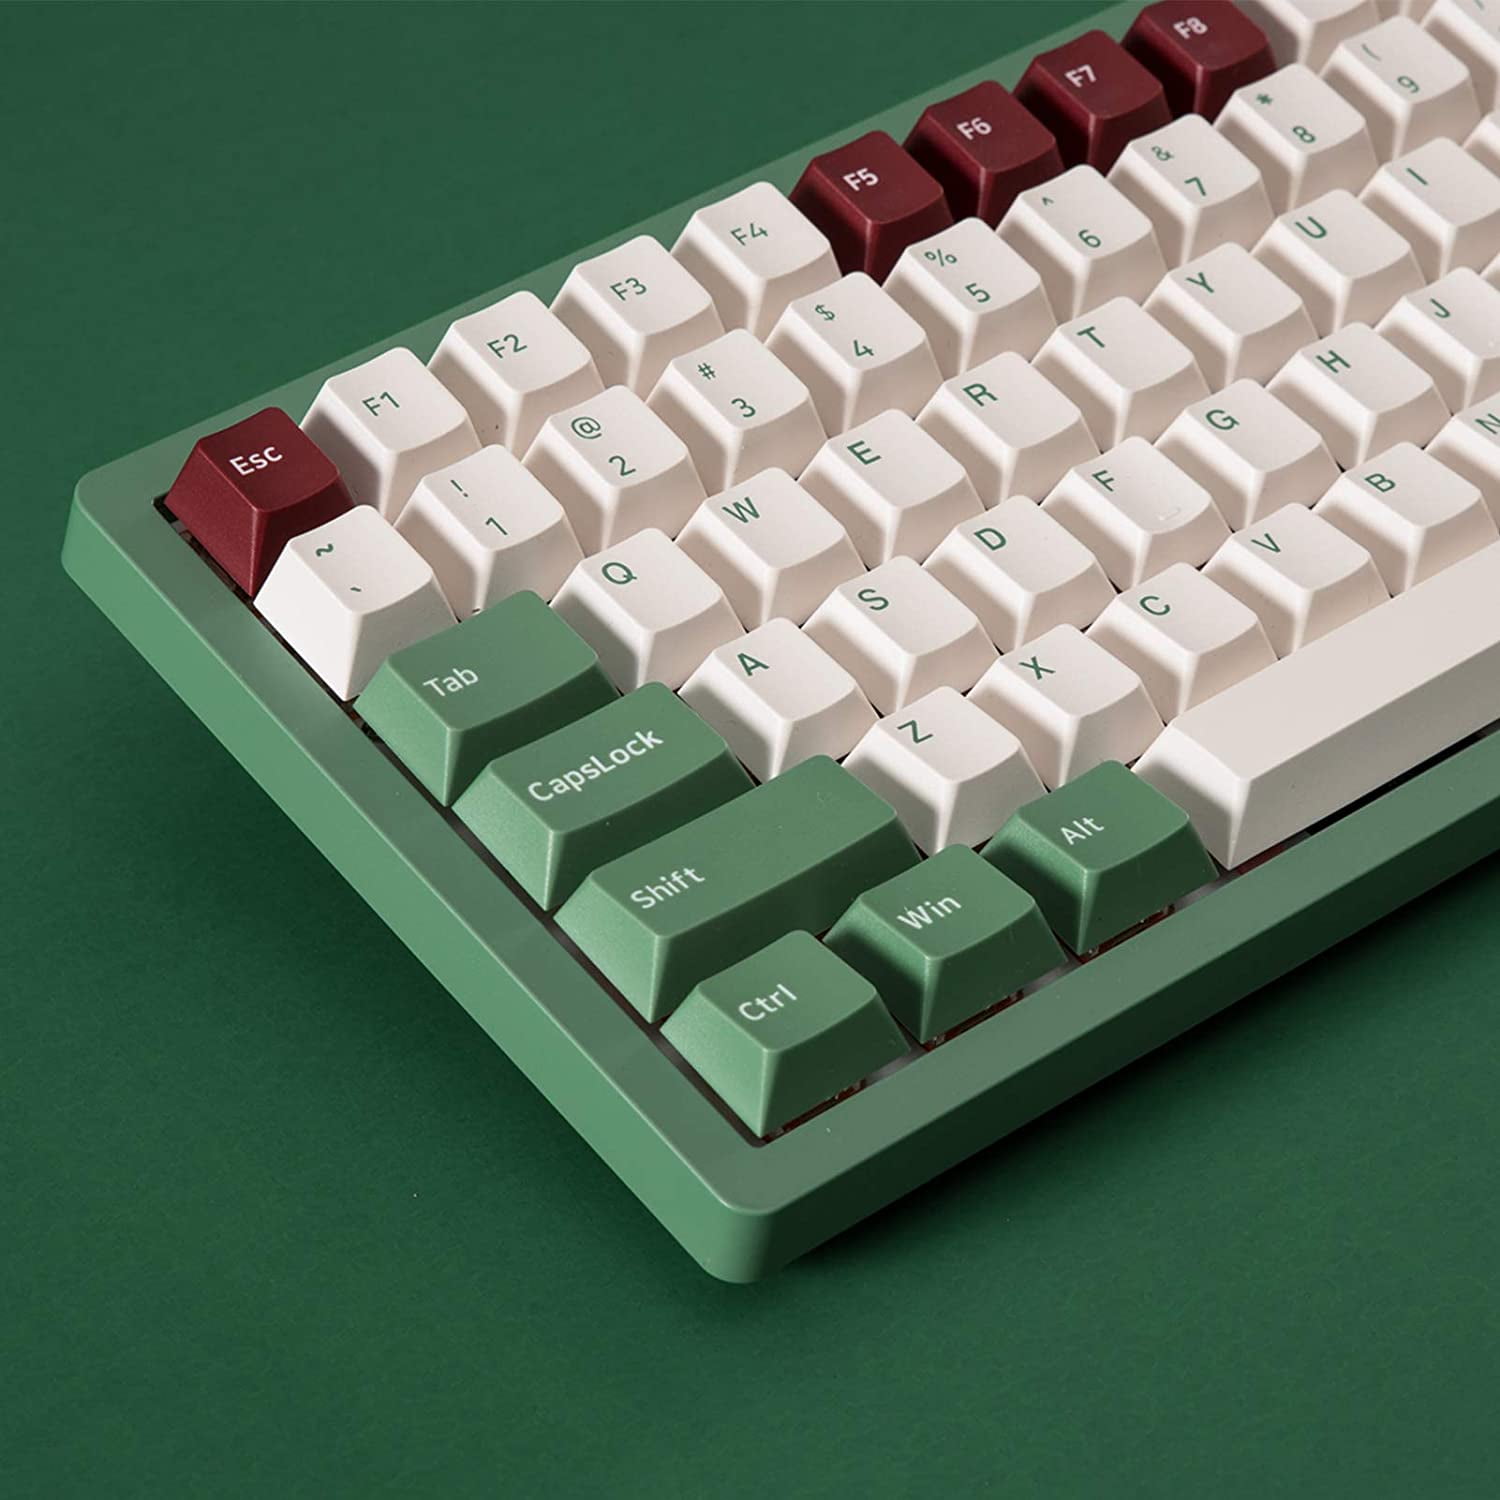 Gateron Orange Tactile Switch Matcha Red Bean Themed Programmable Green Keyboard,  PBT Doubleshot Keycaps and Anti-Ghosting Akko 100-Key 96% Wired Mechanical Gaming Keyboard